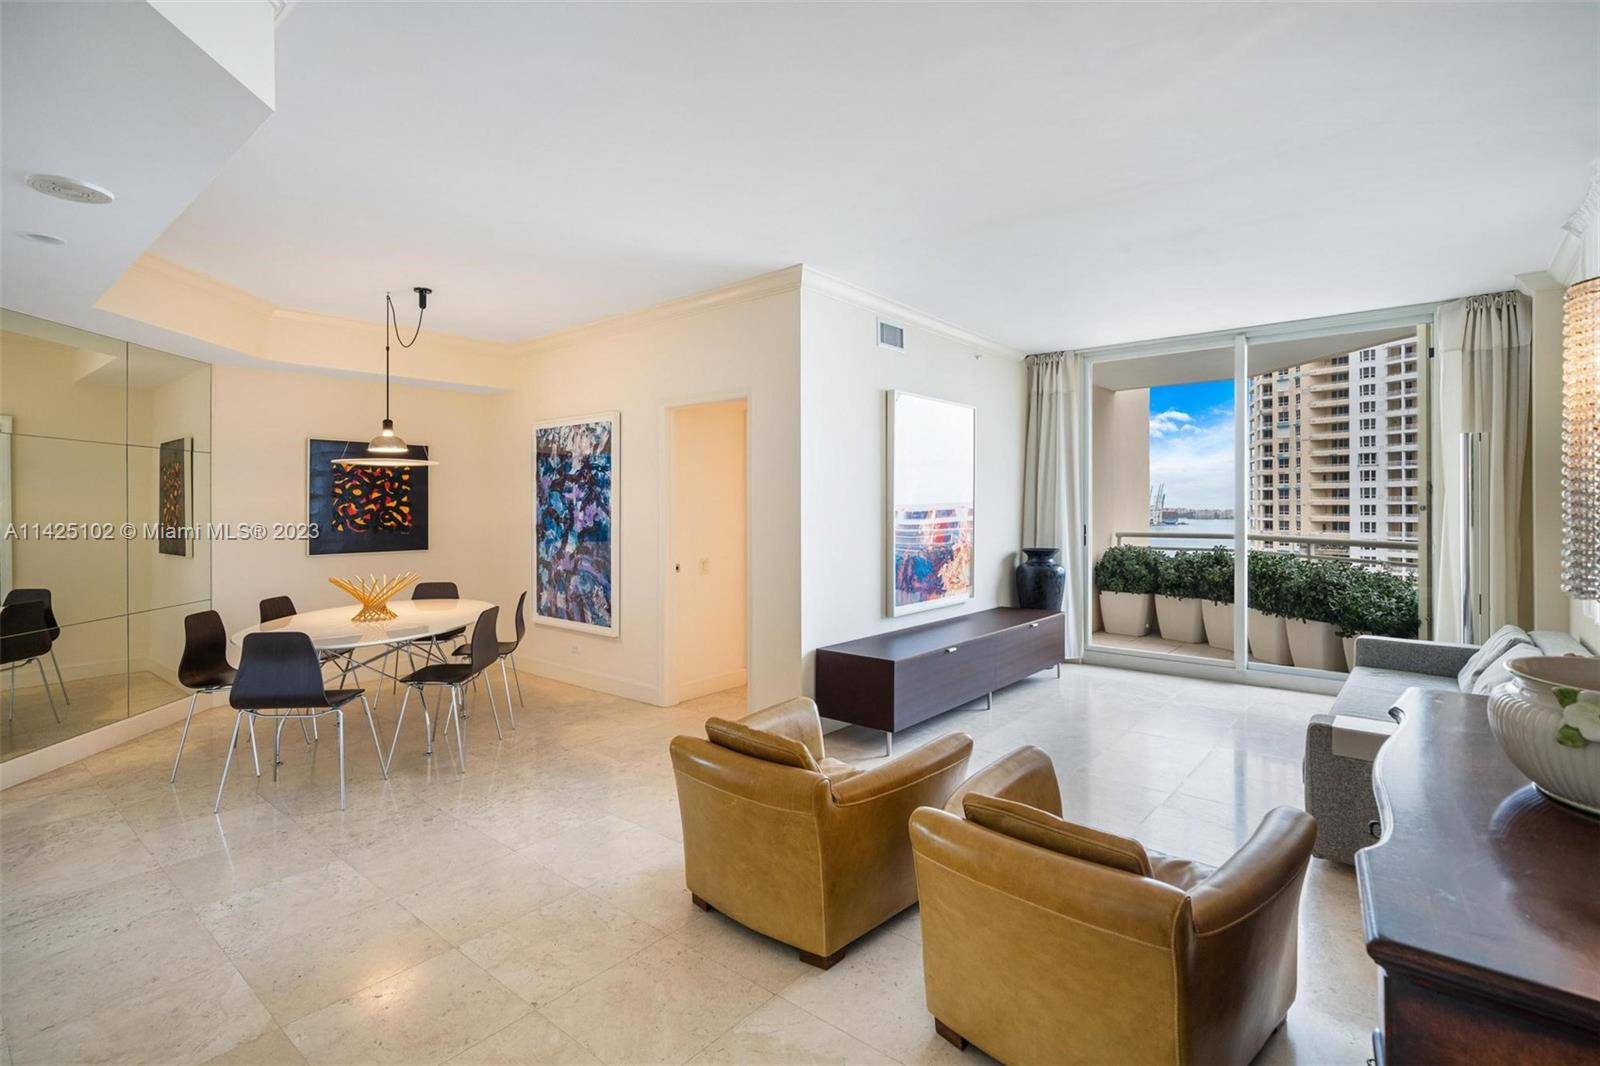 Welcome to the spacious and elegantly designed 2 bed, 2 bath unit at One Tequesta.